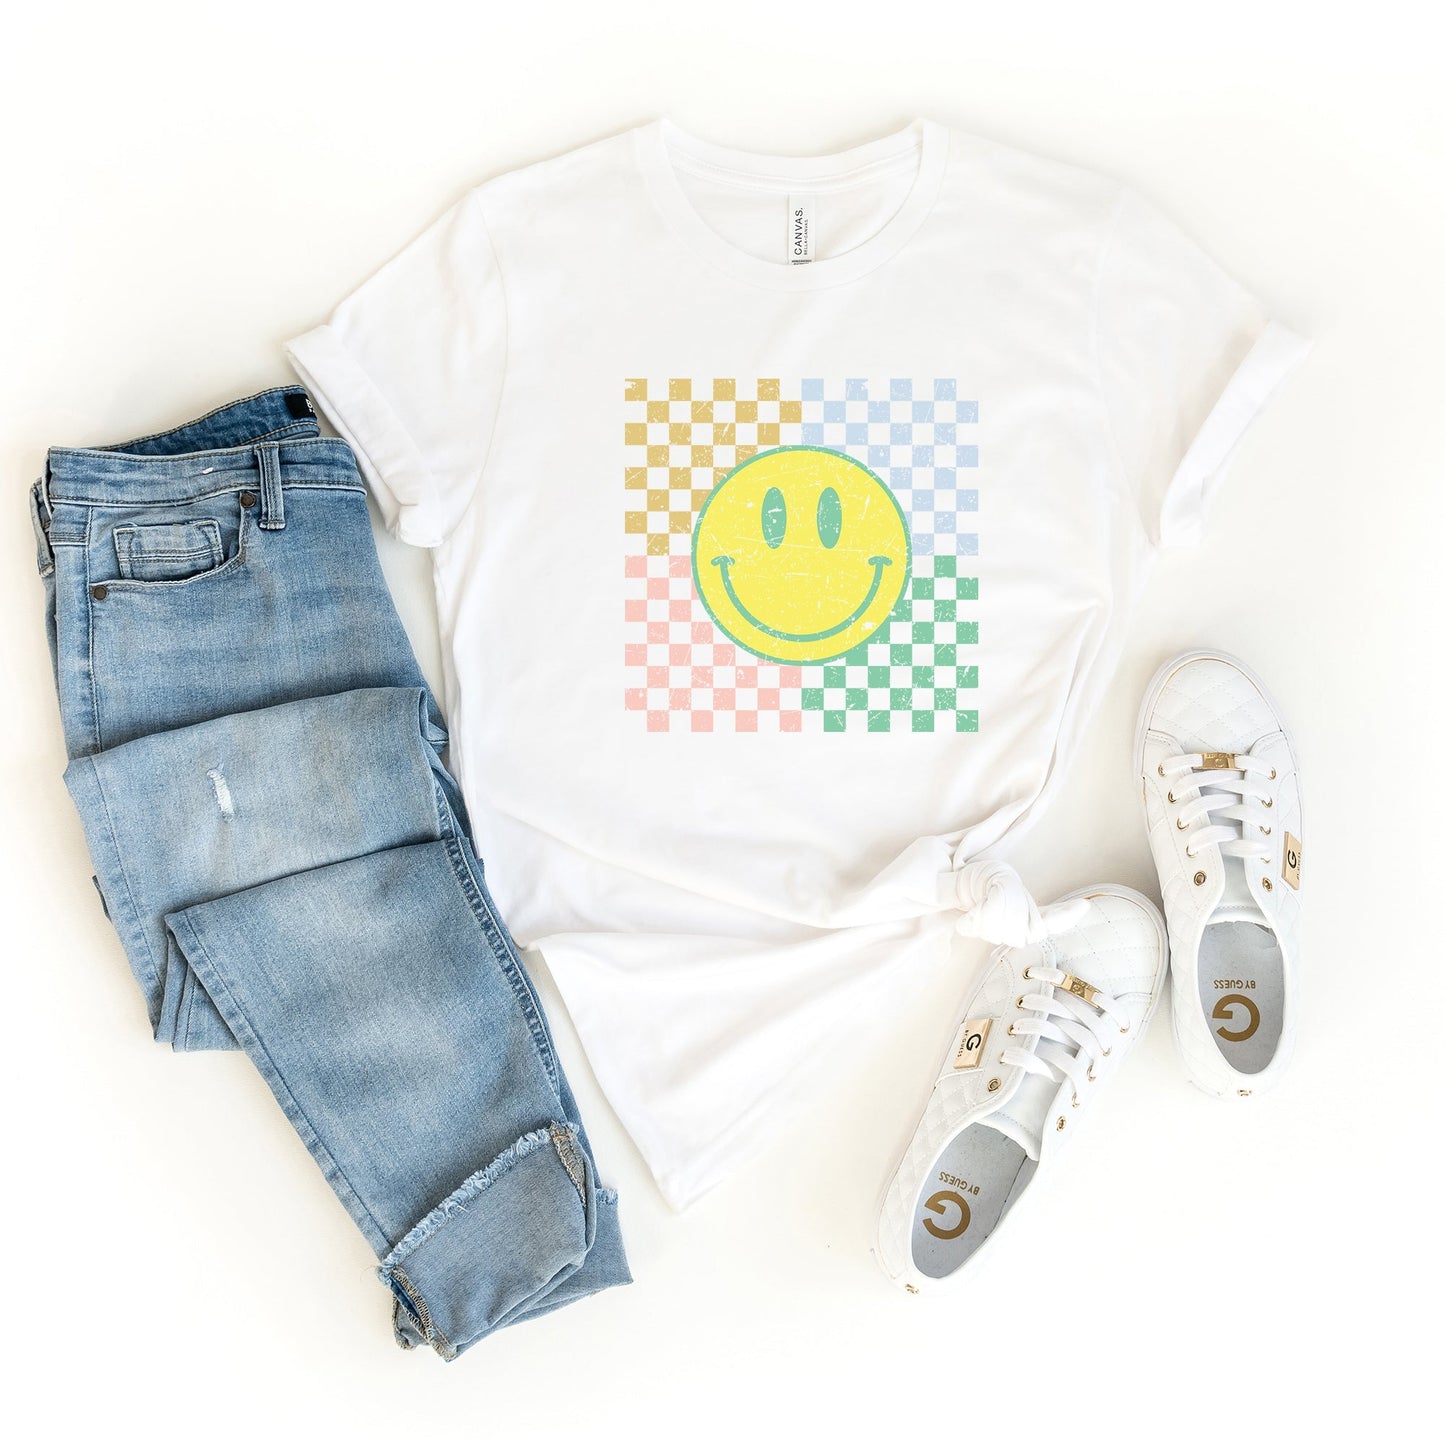 Four Square Smiley Face | Short Sleeve Crew Neck